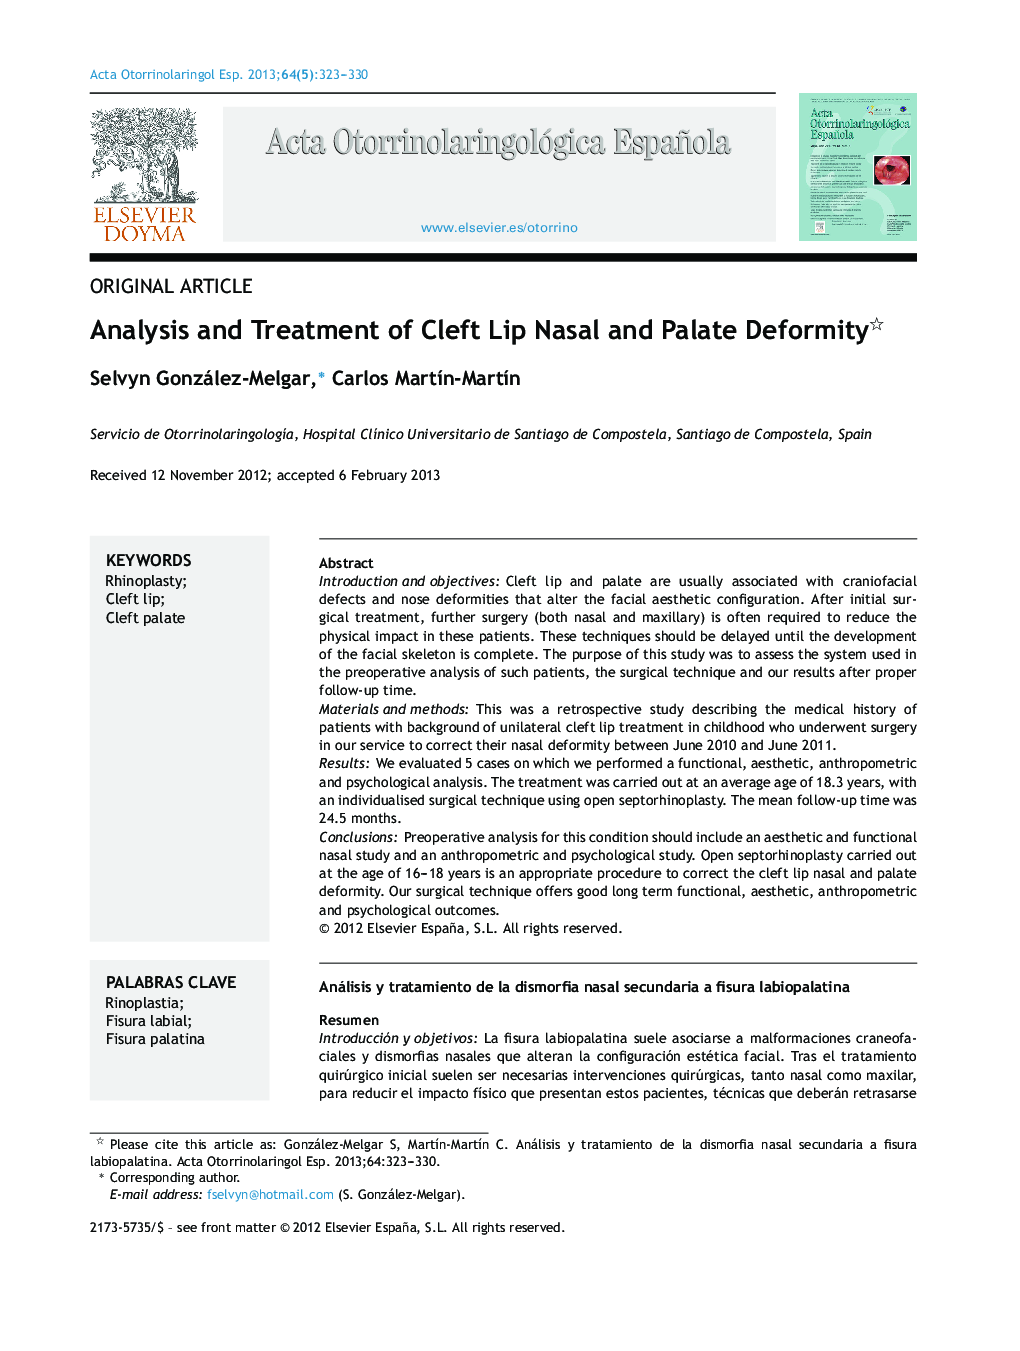 Analysis and Treatment of Cleft Lip Nasal and Palate Deformity 